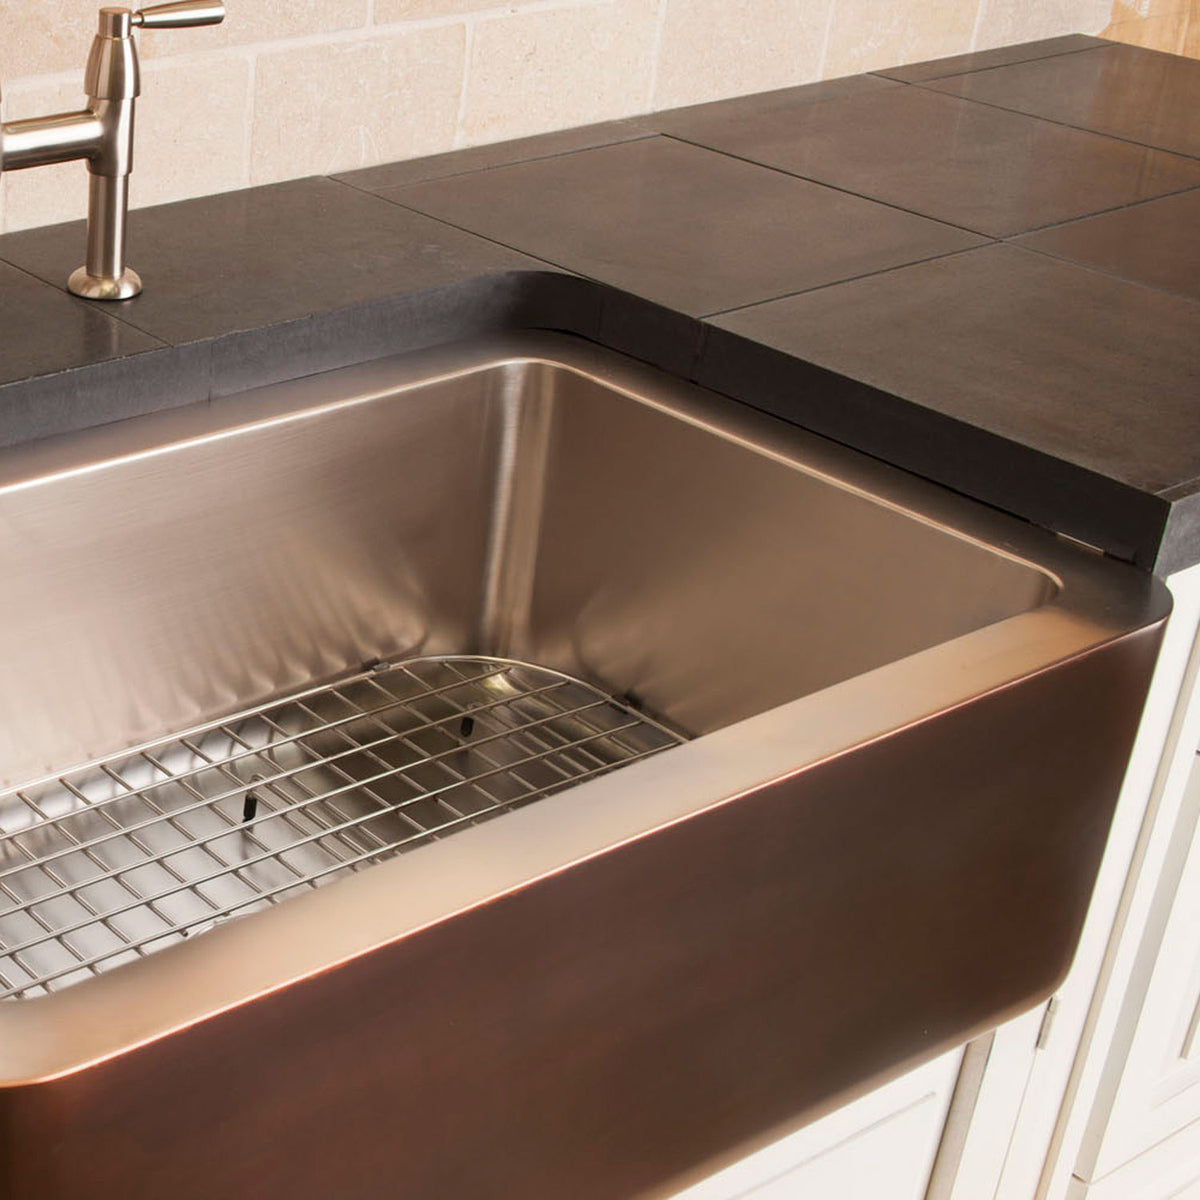 Copper/Stainless Farmhouse Sink image 4 of 4